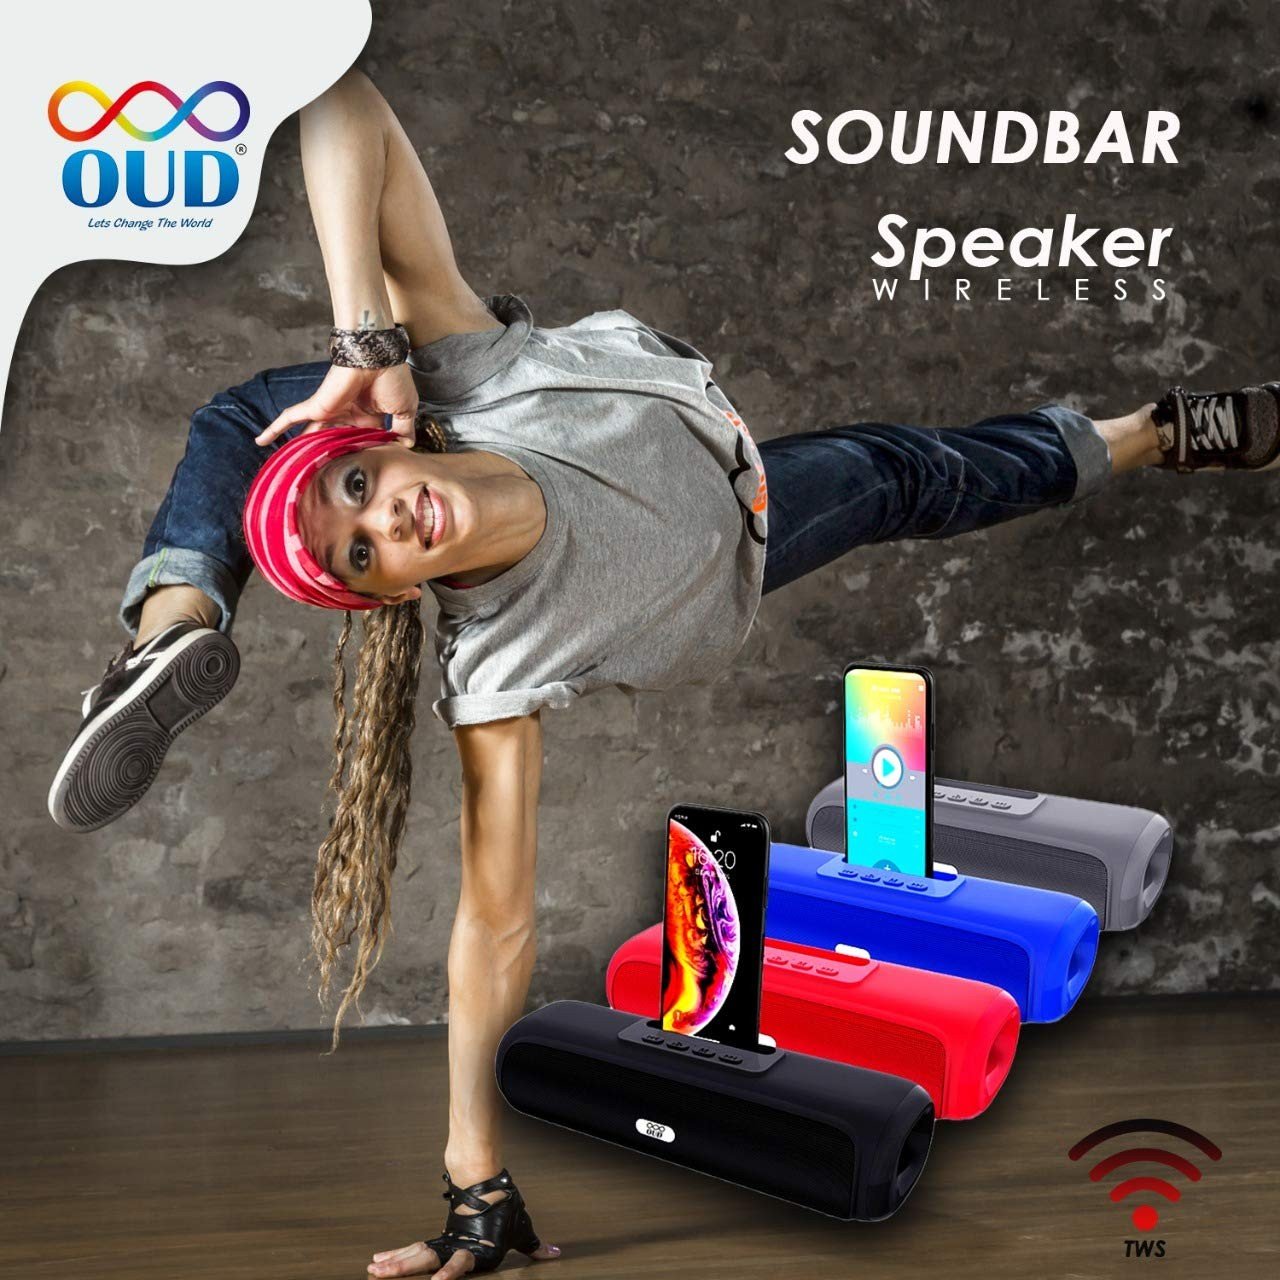 OUD® BT-407 FM SoundBar Wireless Bluetooth Speakers with Attractive Dual Speaker with 10W Power Output,Stereo Bass Sound System with 10 Meter Range